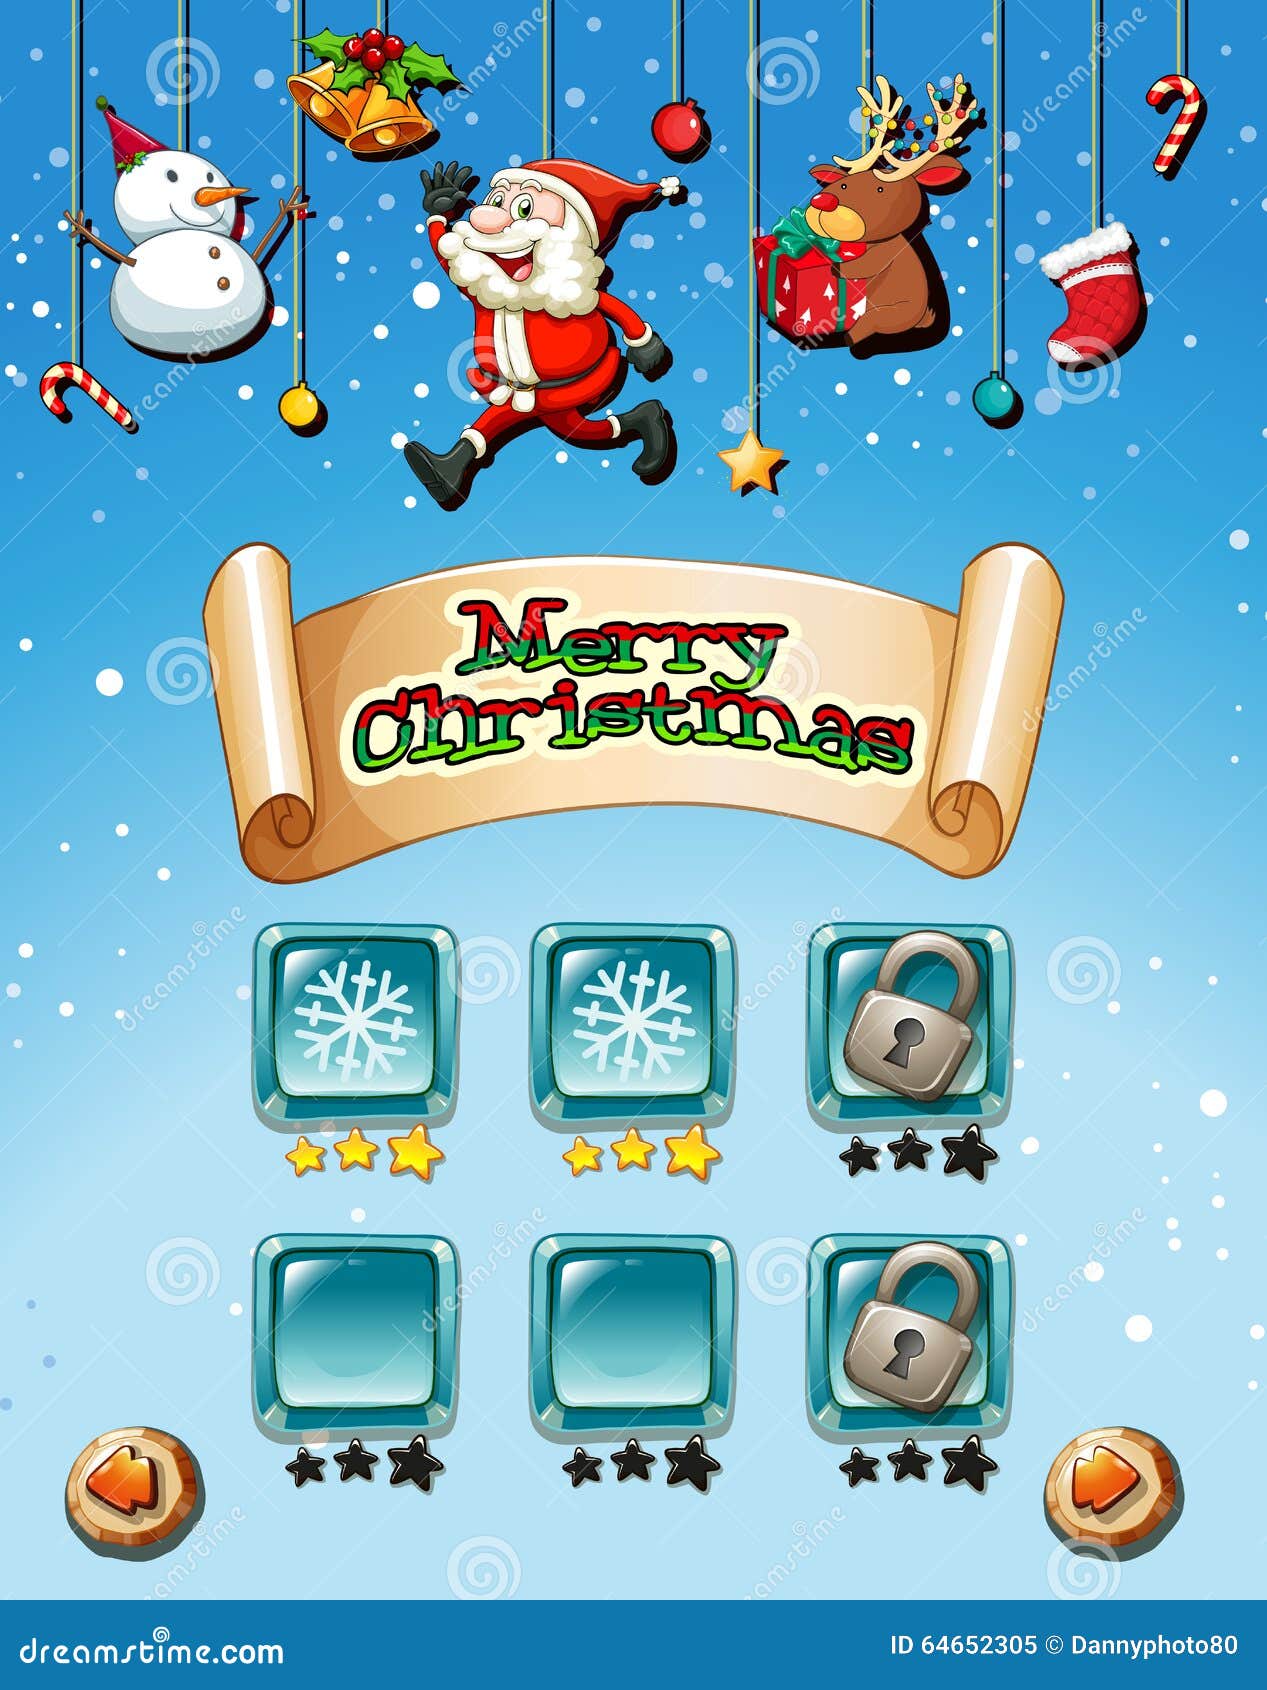 Merry Christmas on game template Download preview Add to lightbox FREE DOWNLOAD